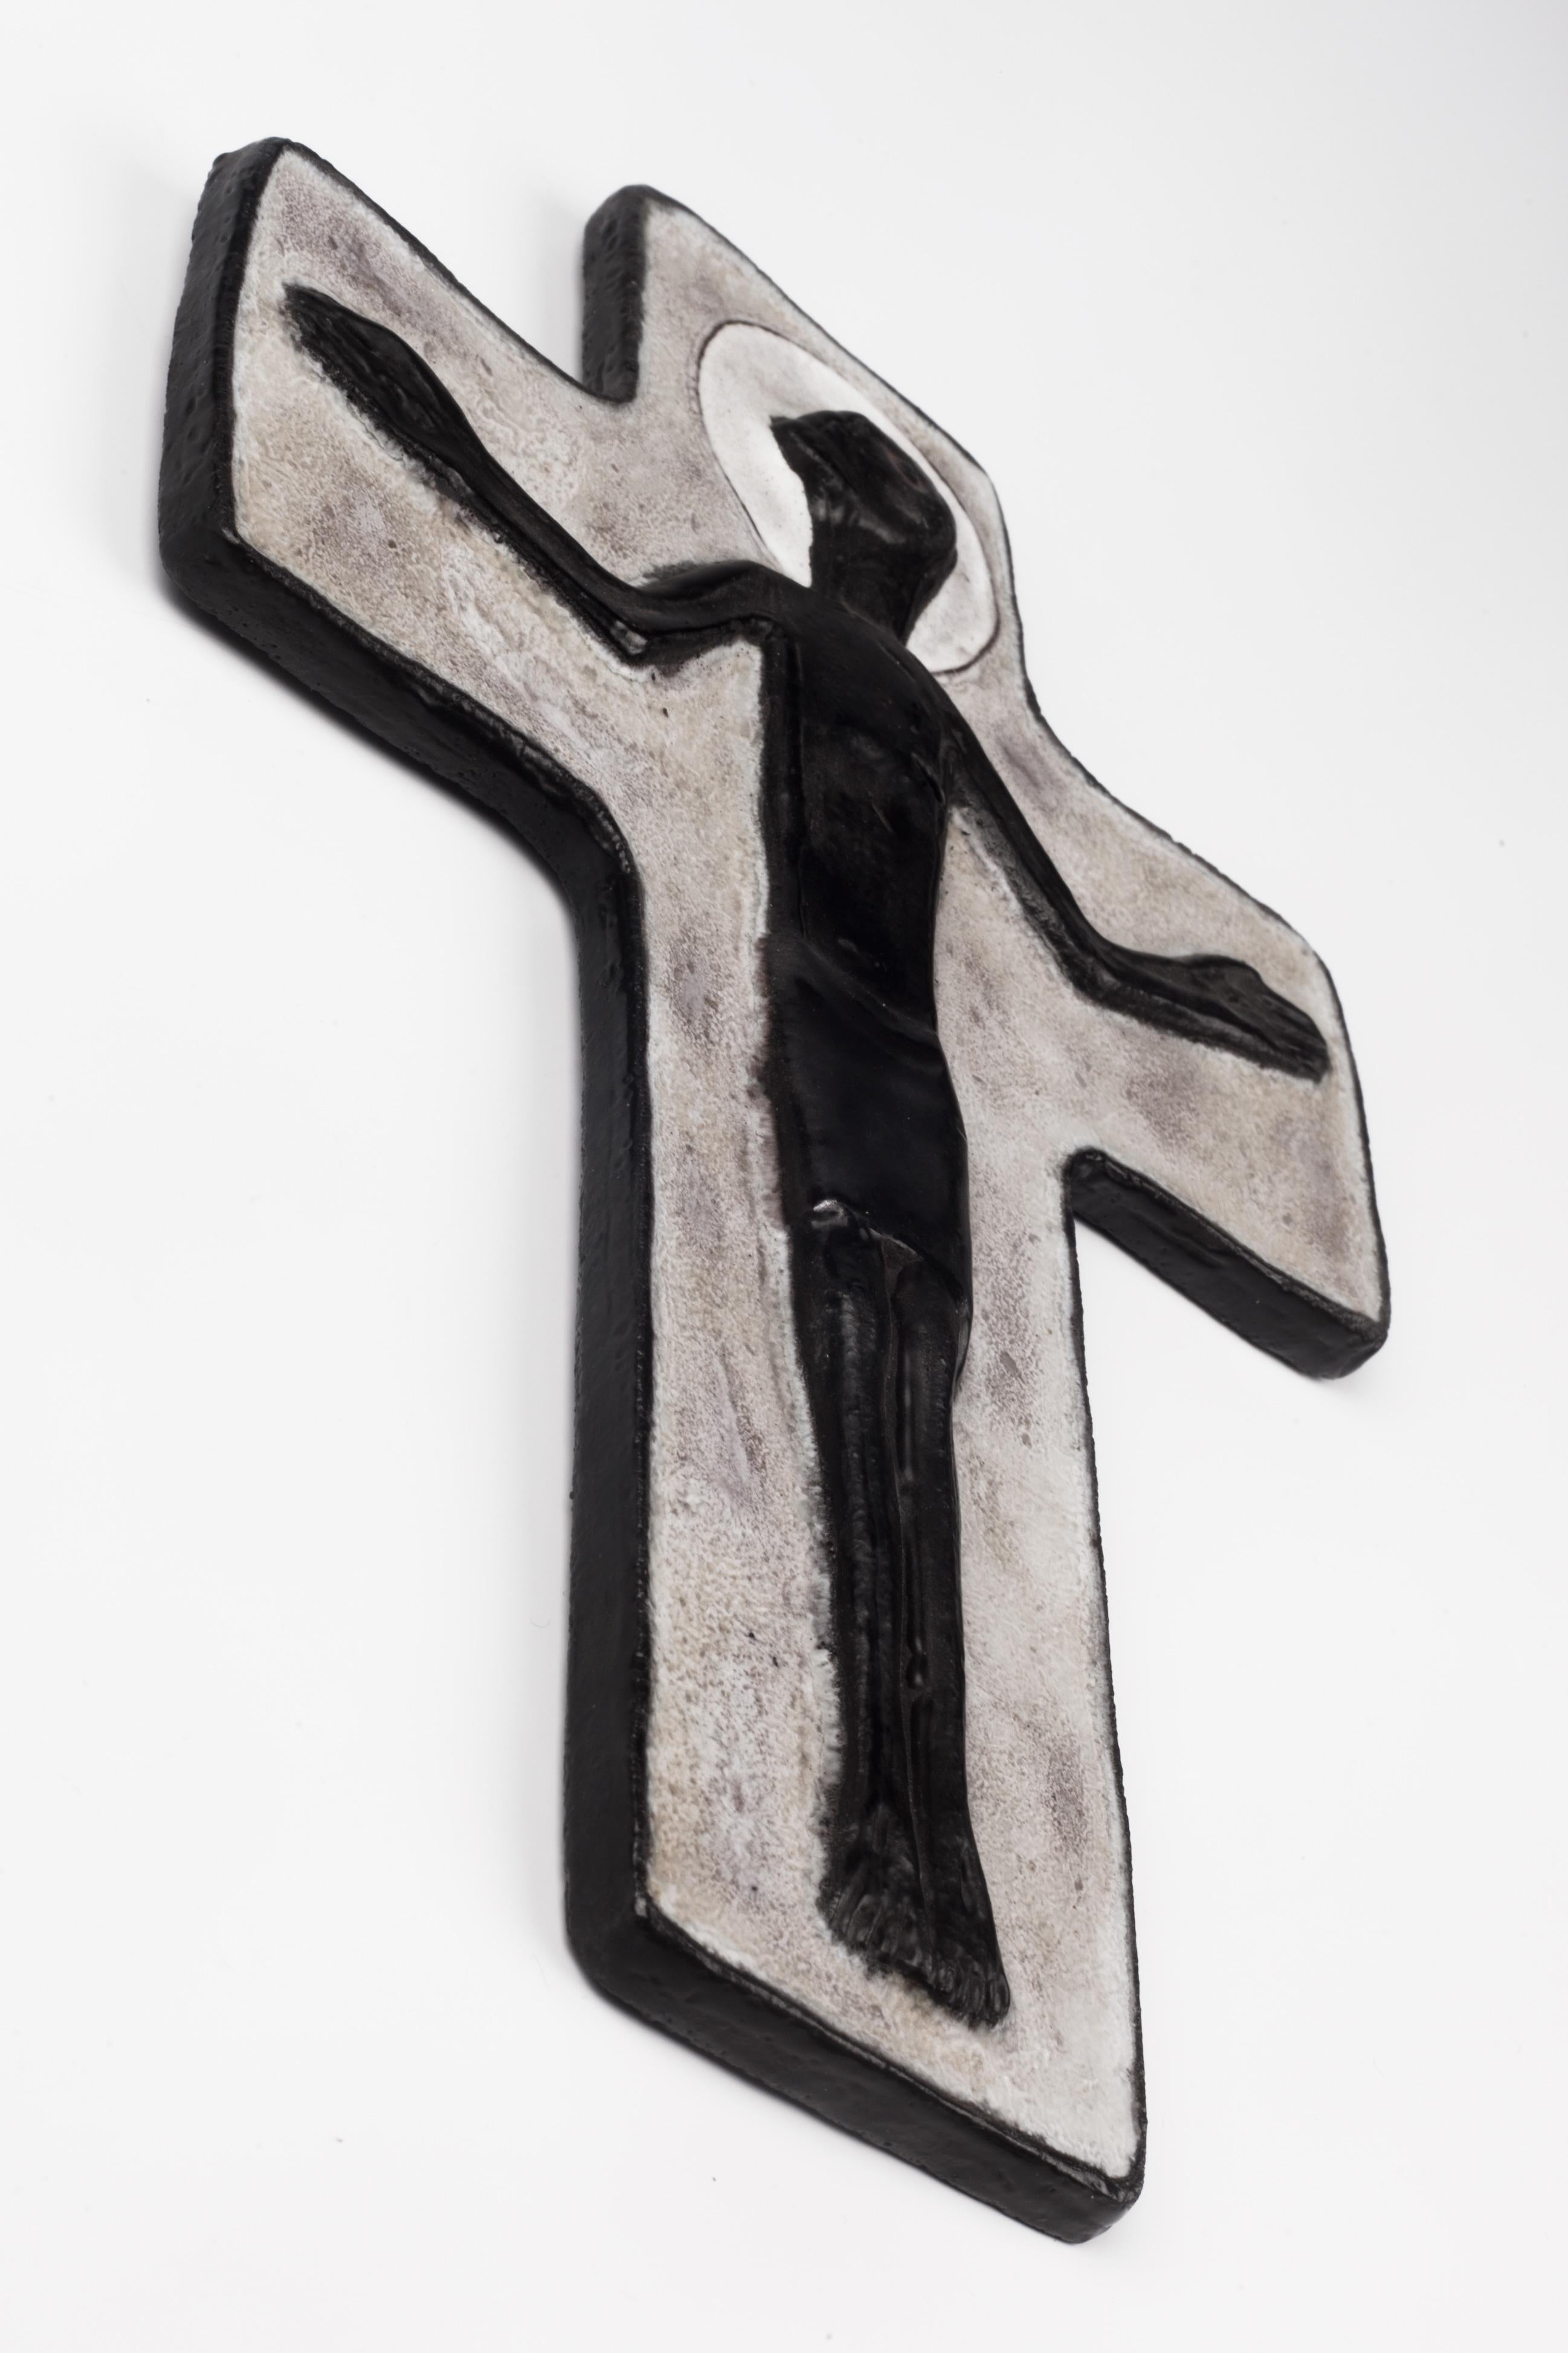 Wall crucifix in ceramic, artisan made by hand in Belgium in the 1950s. Glossy dark grey, nearly black Christ on glossy textured matte grey cross. Brutalist almost Primitive volume and lines showing deep presence. Raw and delicate. 

From